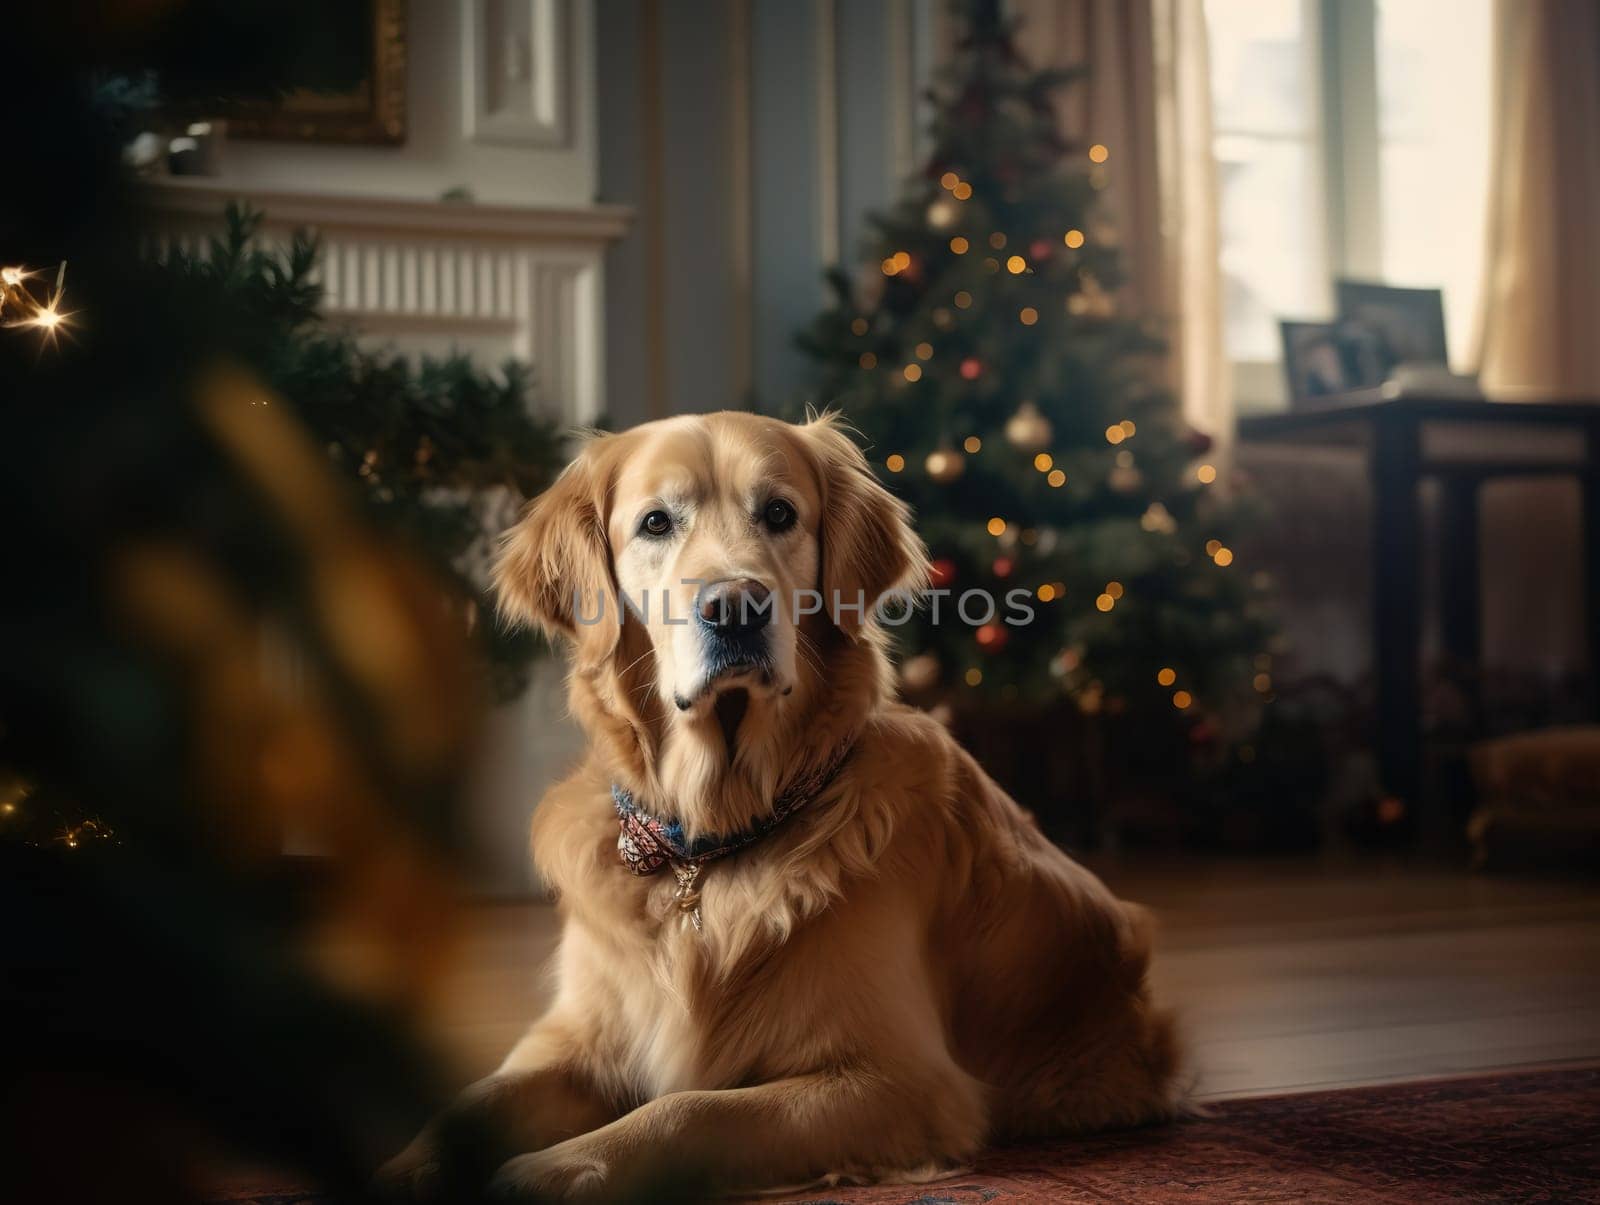 Dog Sits In Room Decorated For Christmas by GekaSkr